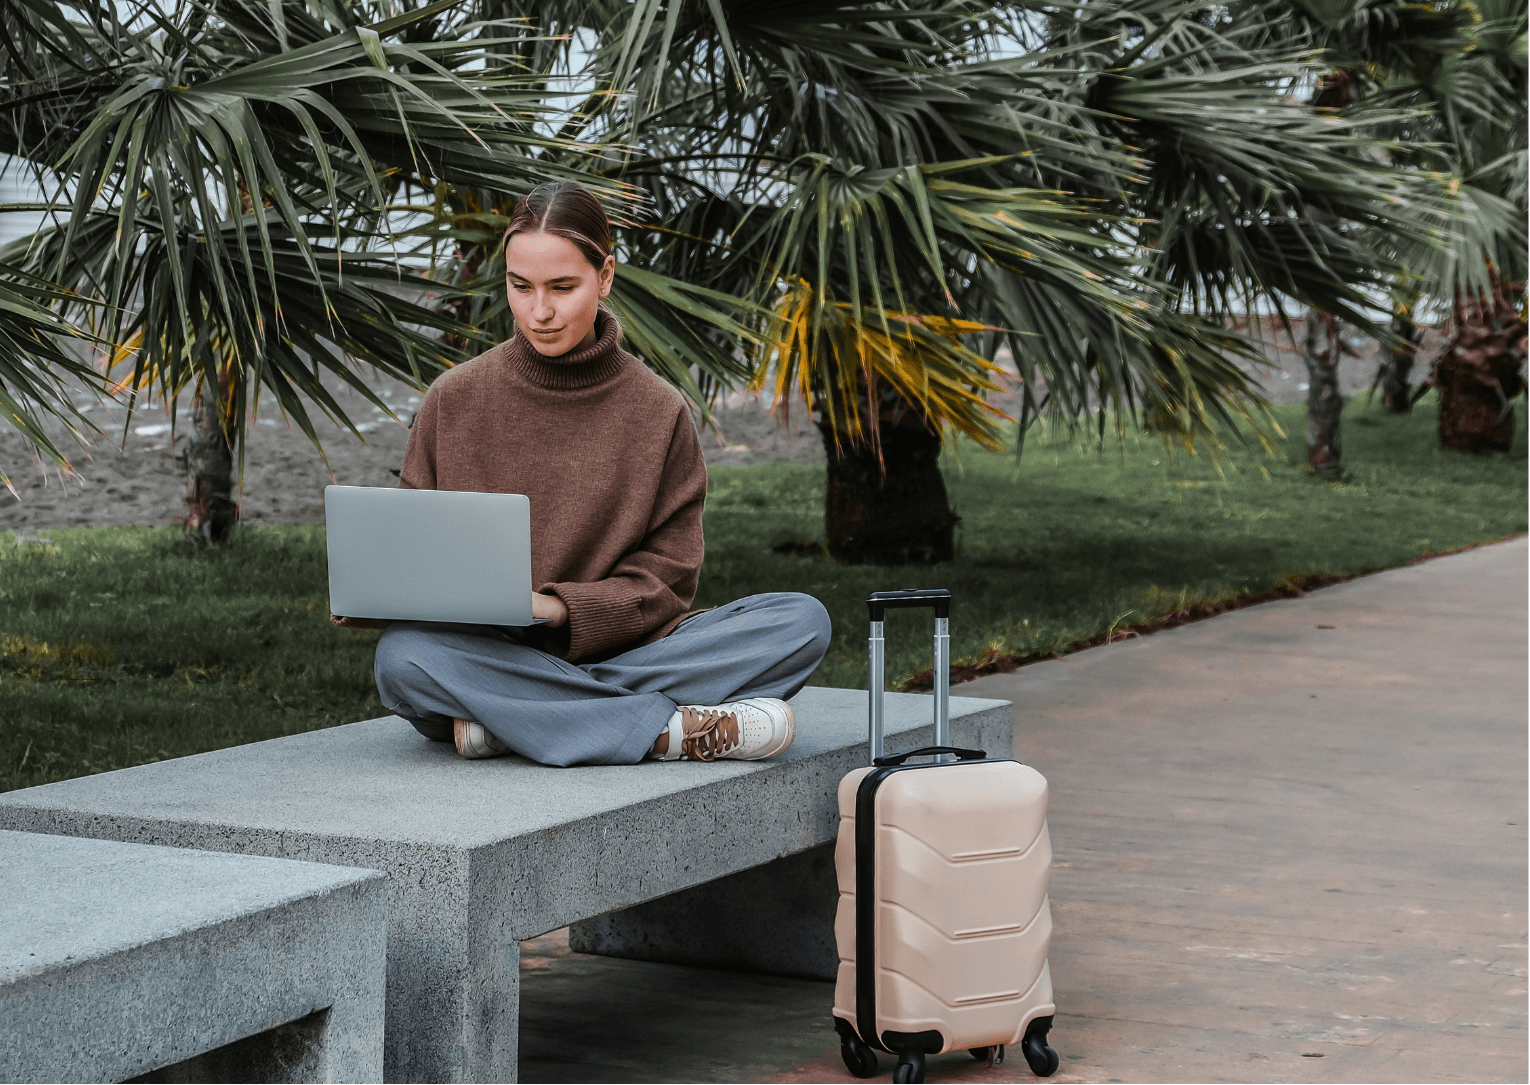 A girl sitting outside making a direct booking on her laptop.